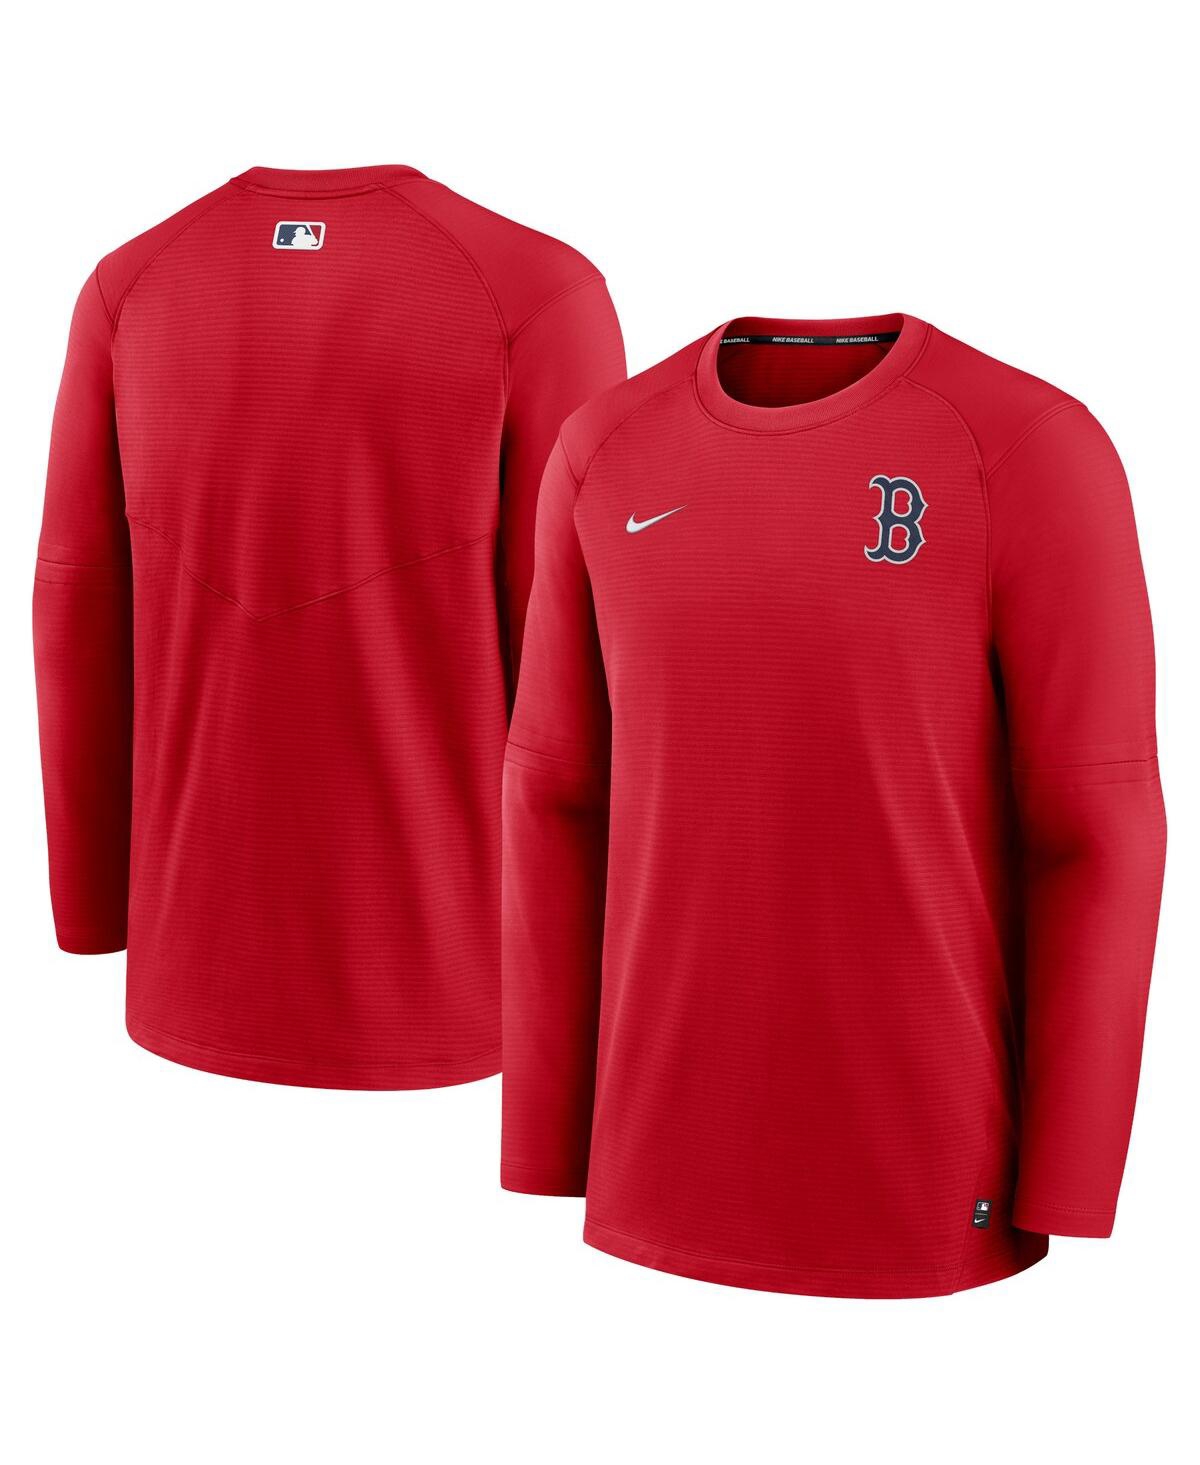 Nike Men's  Red Boston Red Sox Authentic Collection Logo Performance Long Sleeve T-shirt